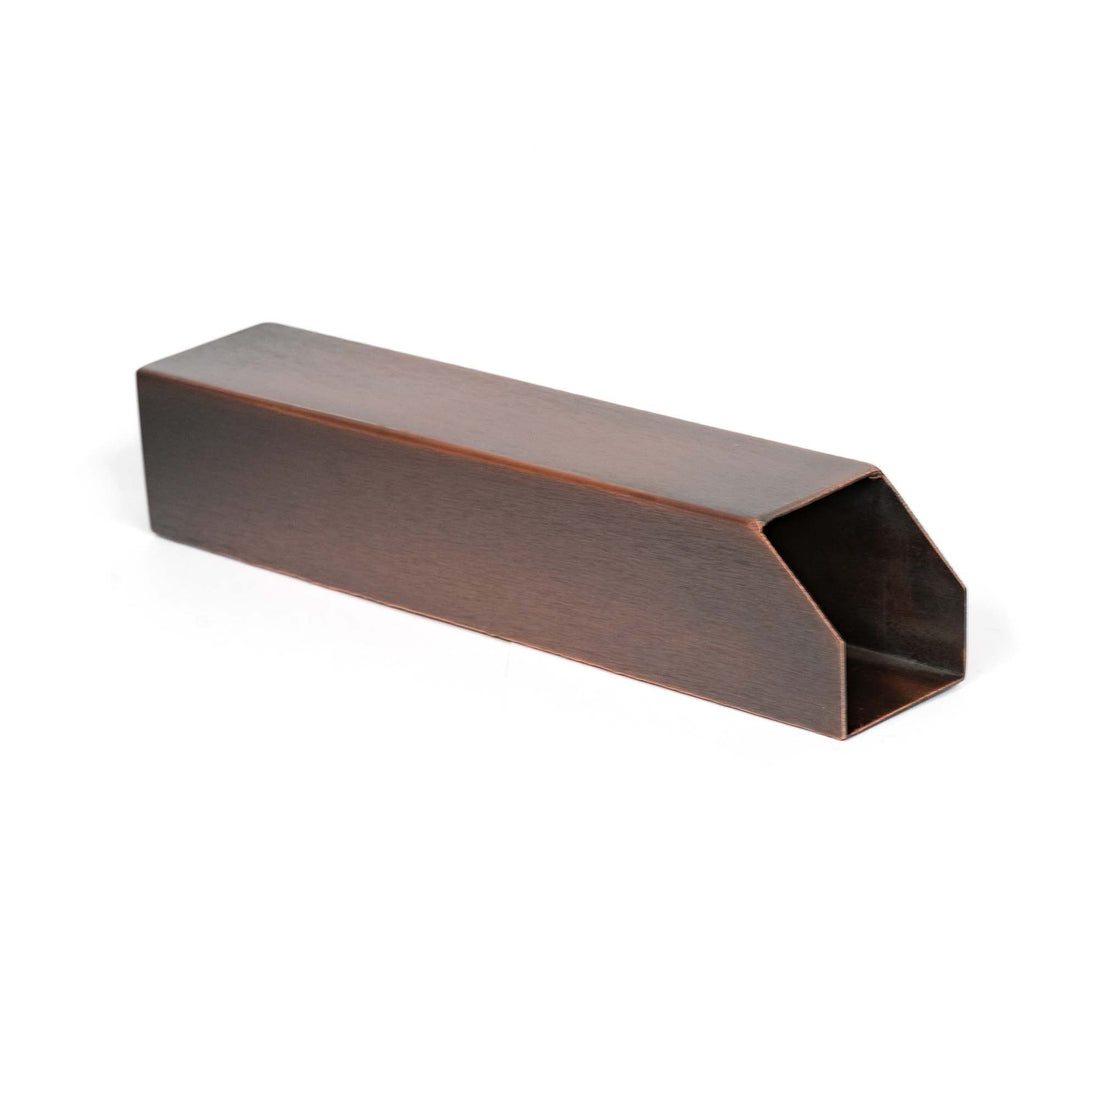 The Outdoor Plus - Chamfered Mini Scupper - Stainless Steel - 2.5" x 2.5" x 12" - OPT-MSCH12SST